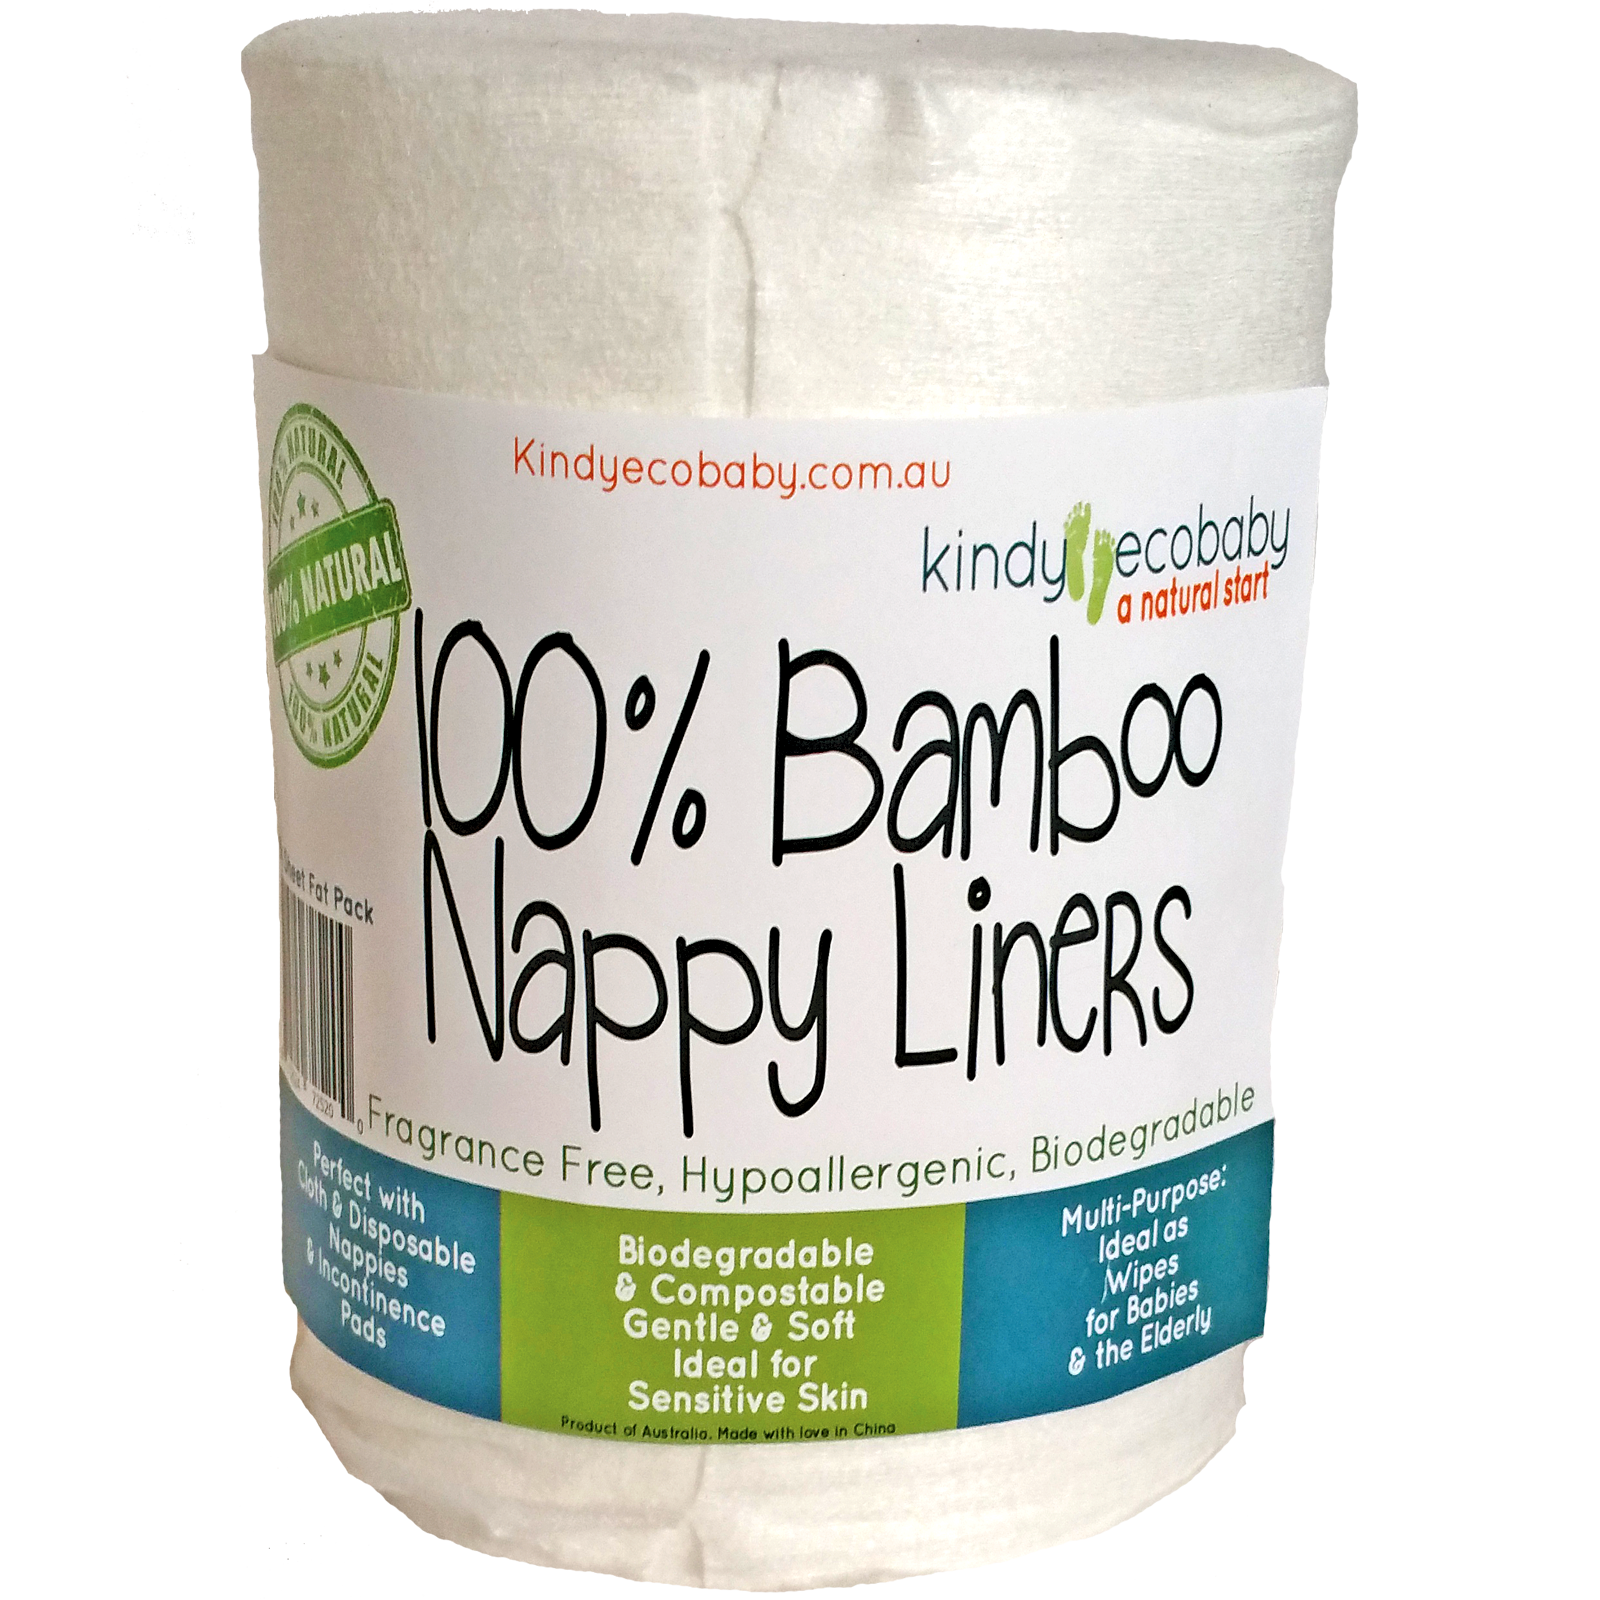 One roll of cream coloured flushable diaper liners from Kindy Ecobaby against a white background